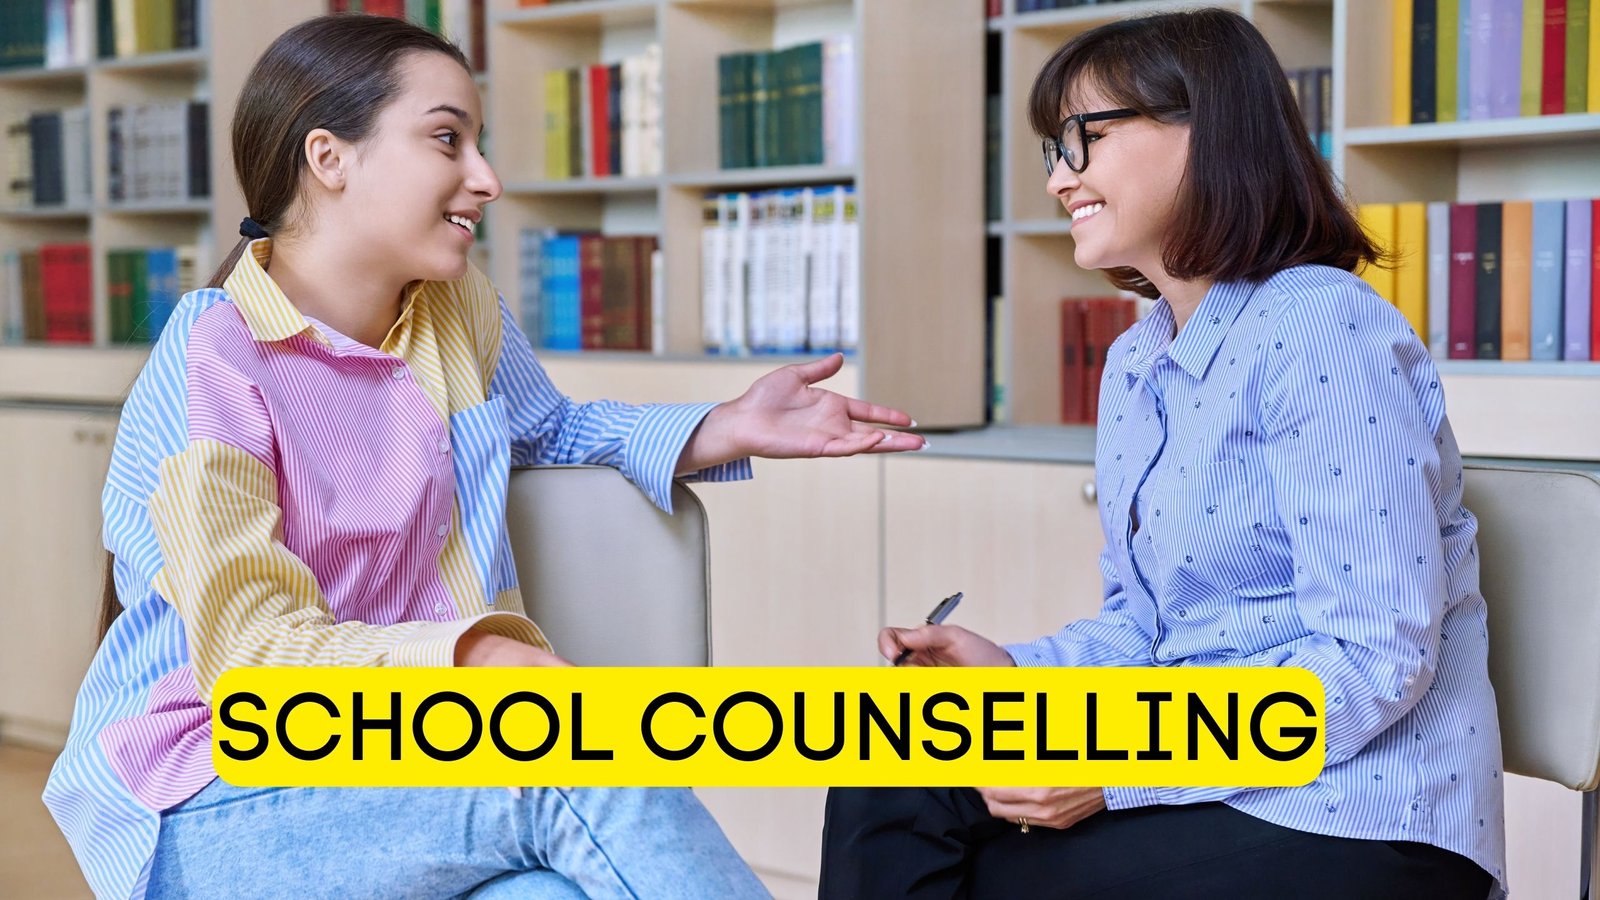 SCHOOL COUNSELLING